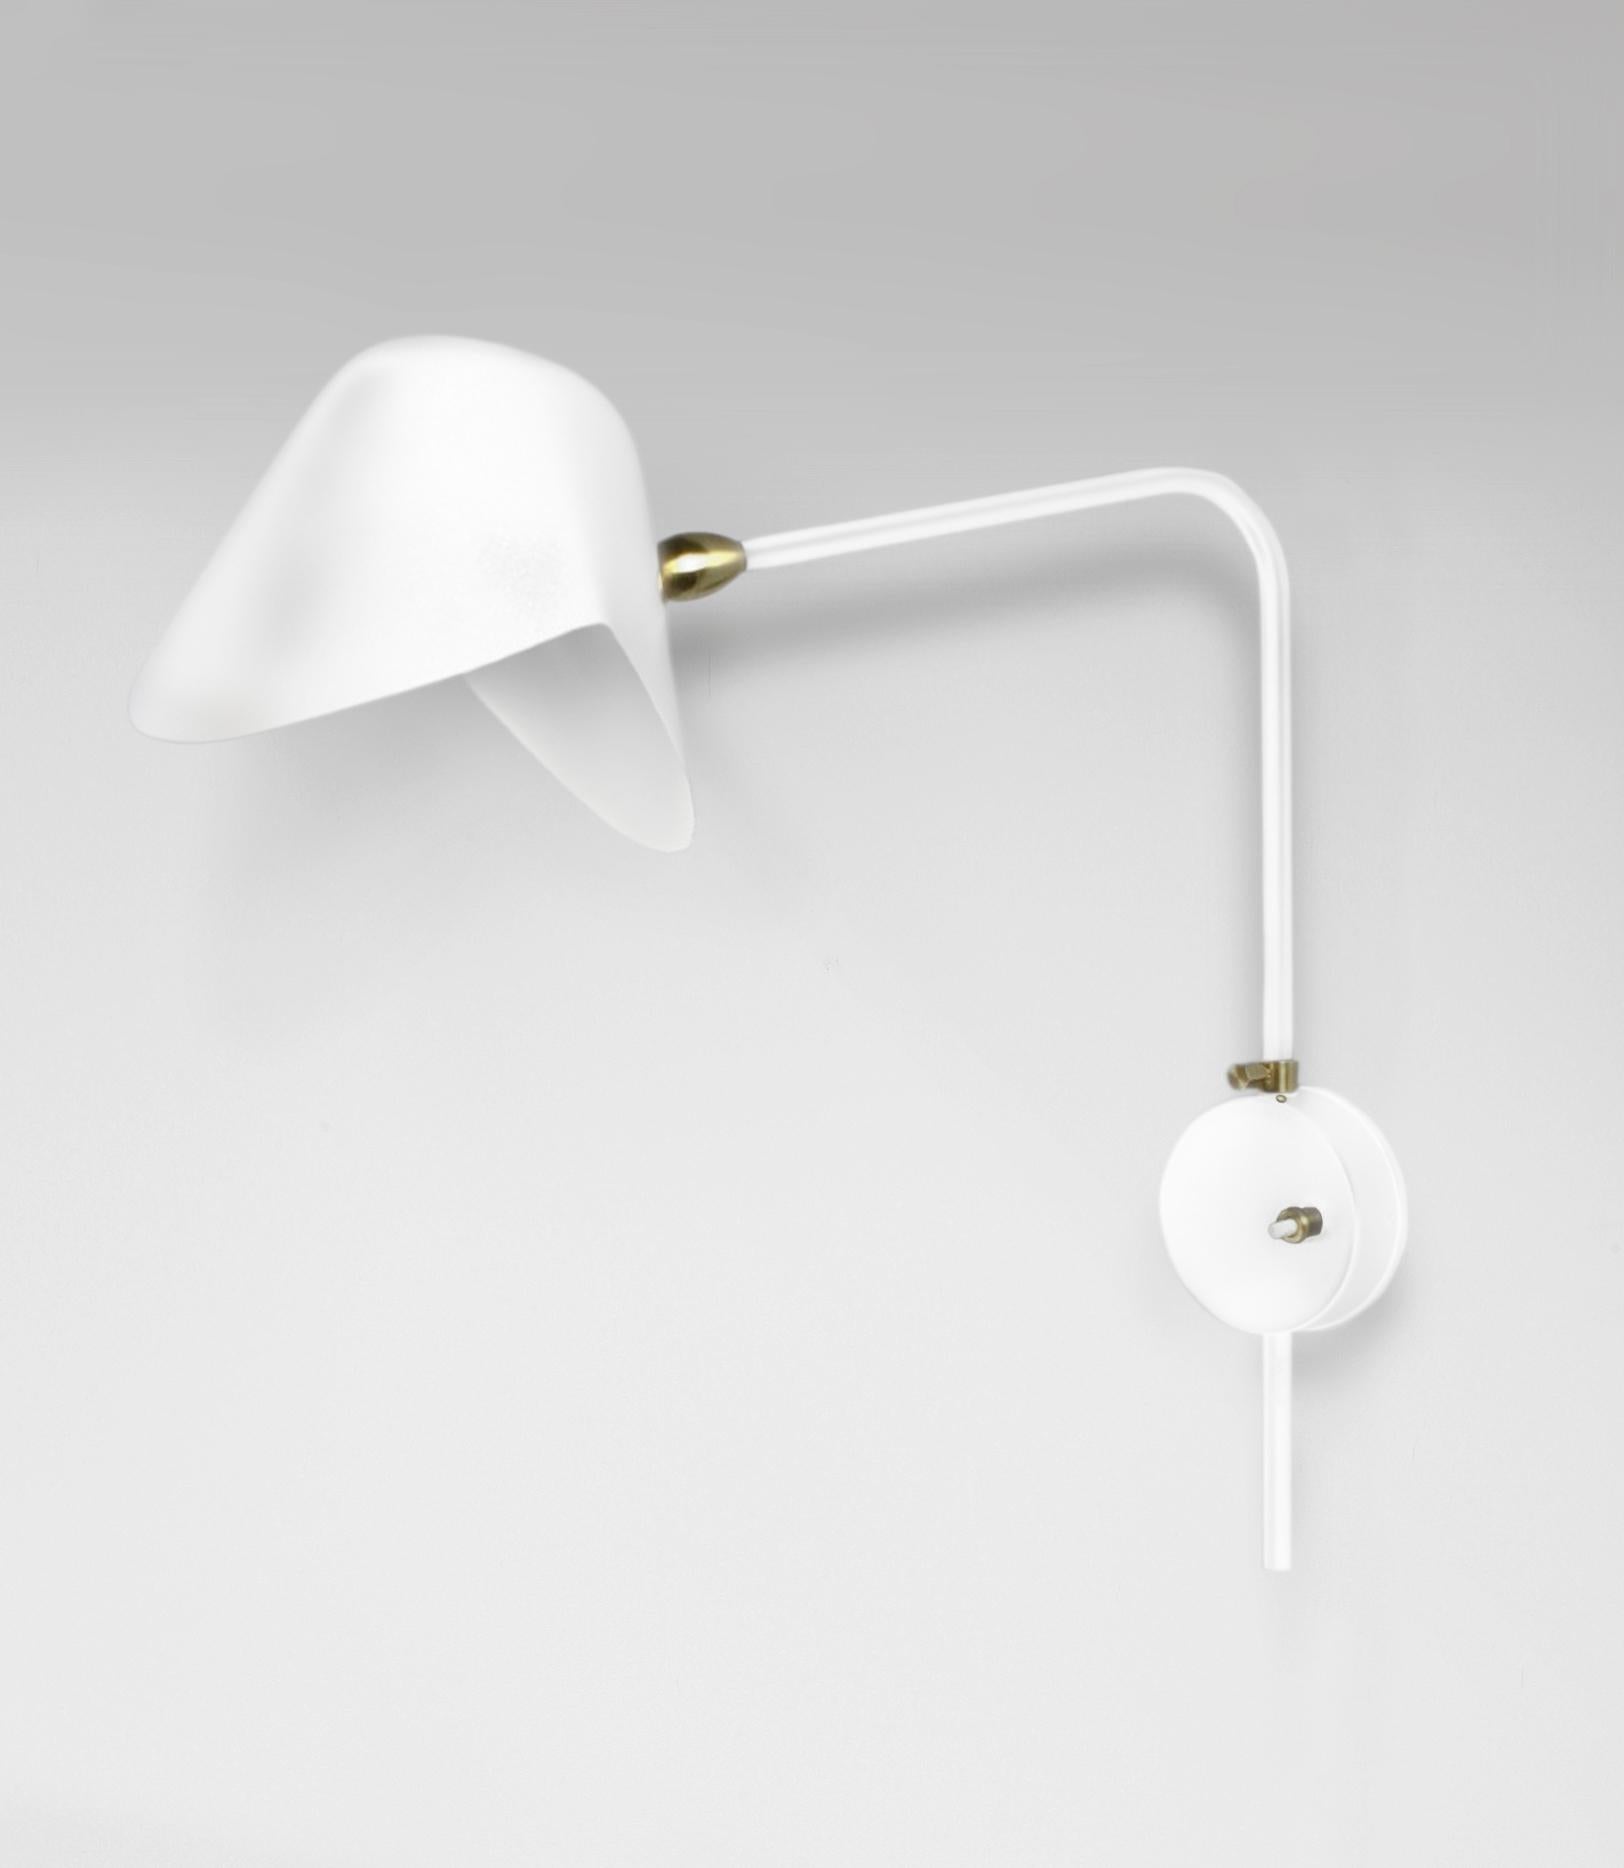 Wall sconce lamp model 'Anthony Wall Lamp With Round Fixation Box' designed by Serge Mouille in 1953.

Manufactured by Editions Serge Mouille in France. The production of lamps, wall lights and floor lamps are manufactured using craftsman’s